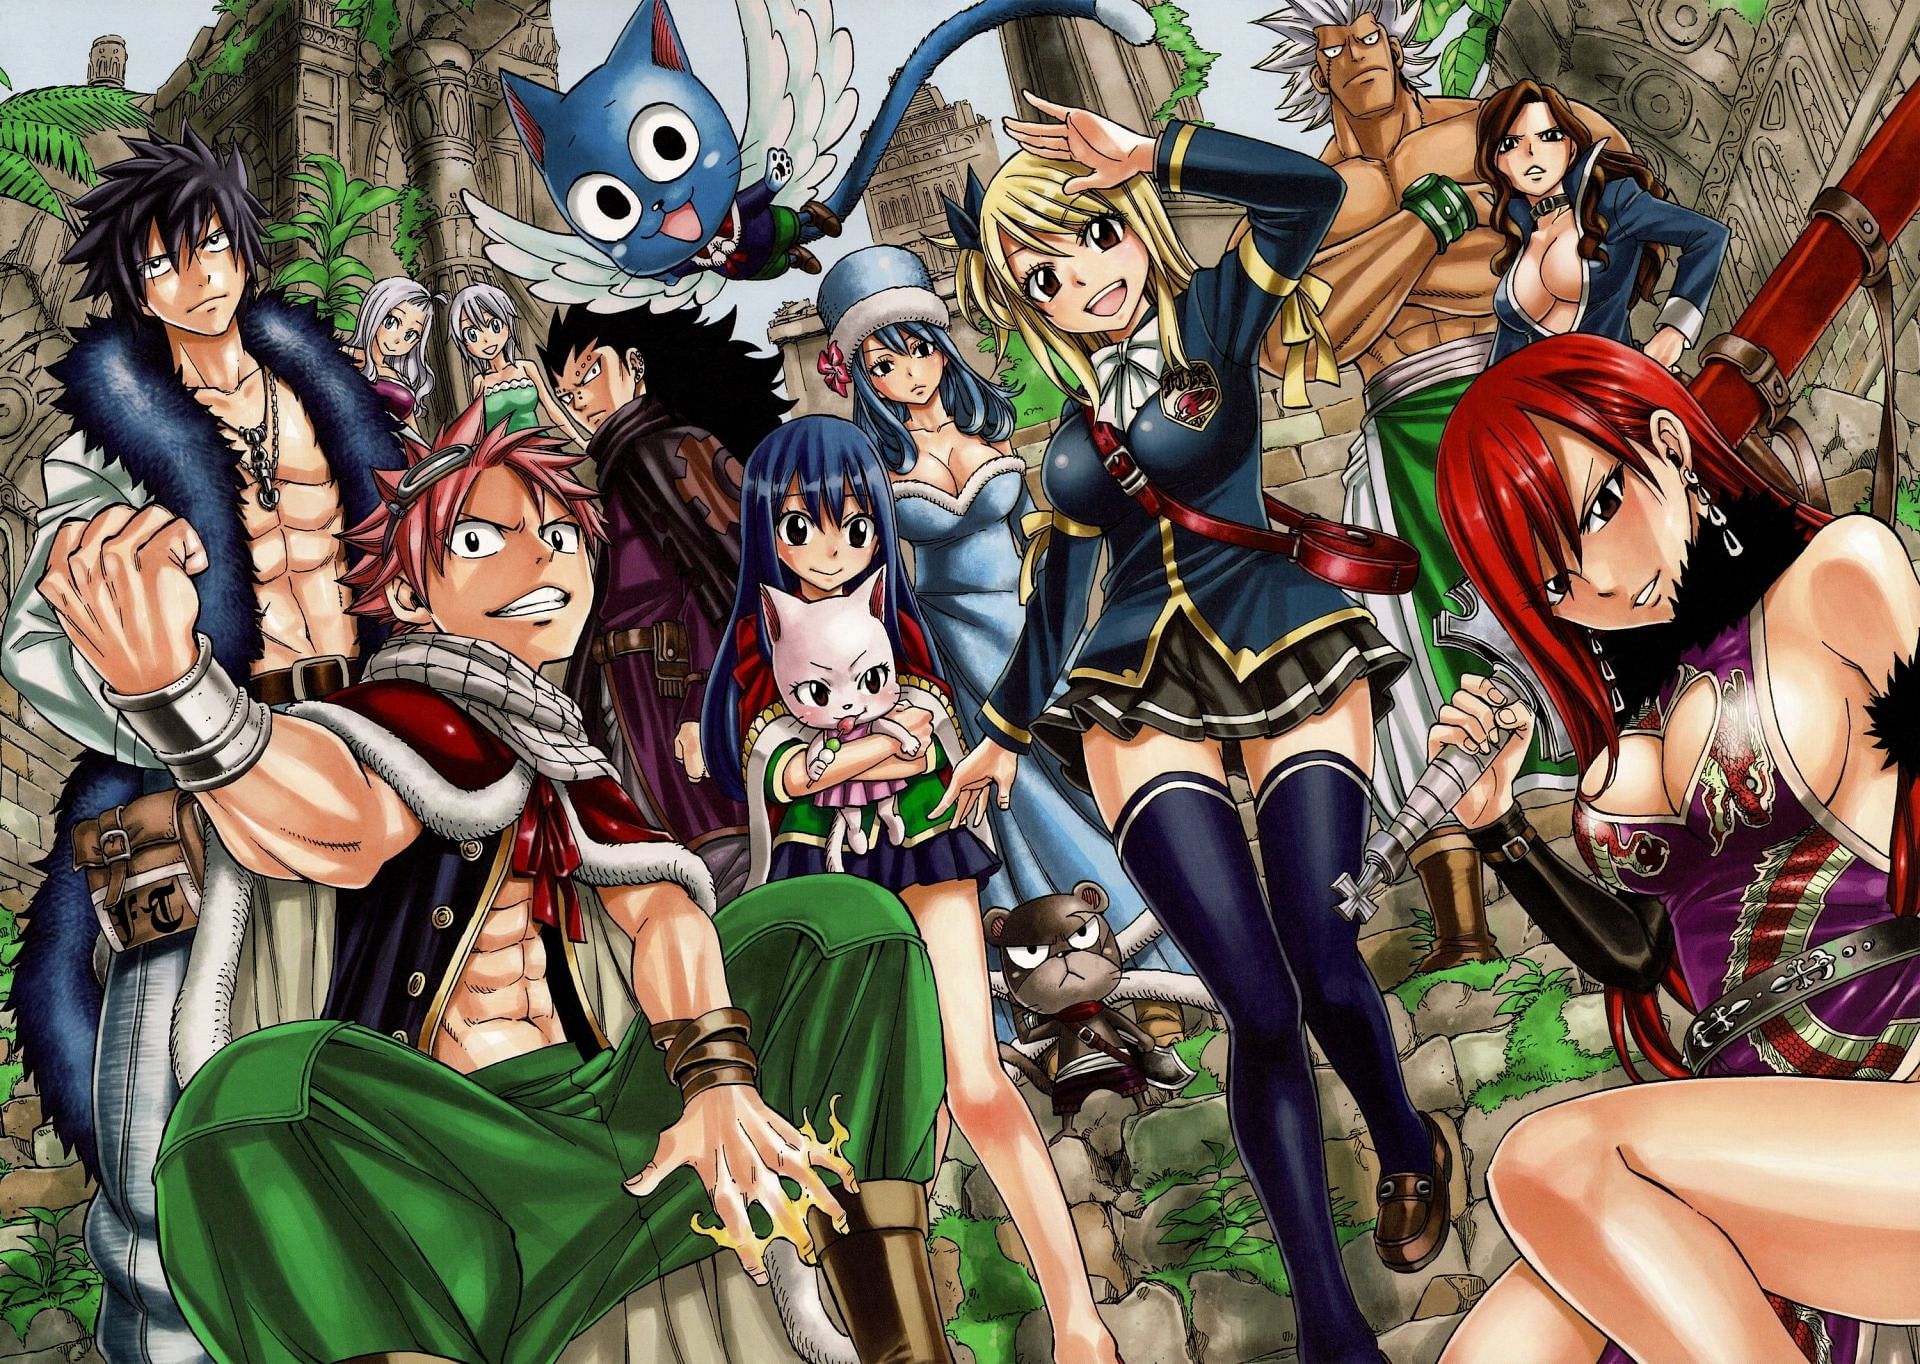 Fairy Tail characters (Image via A1 Pictures Studio)